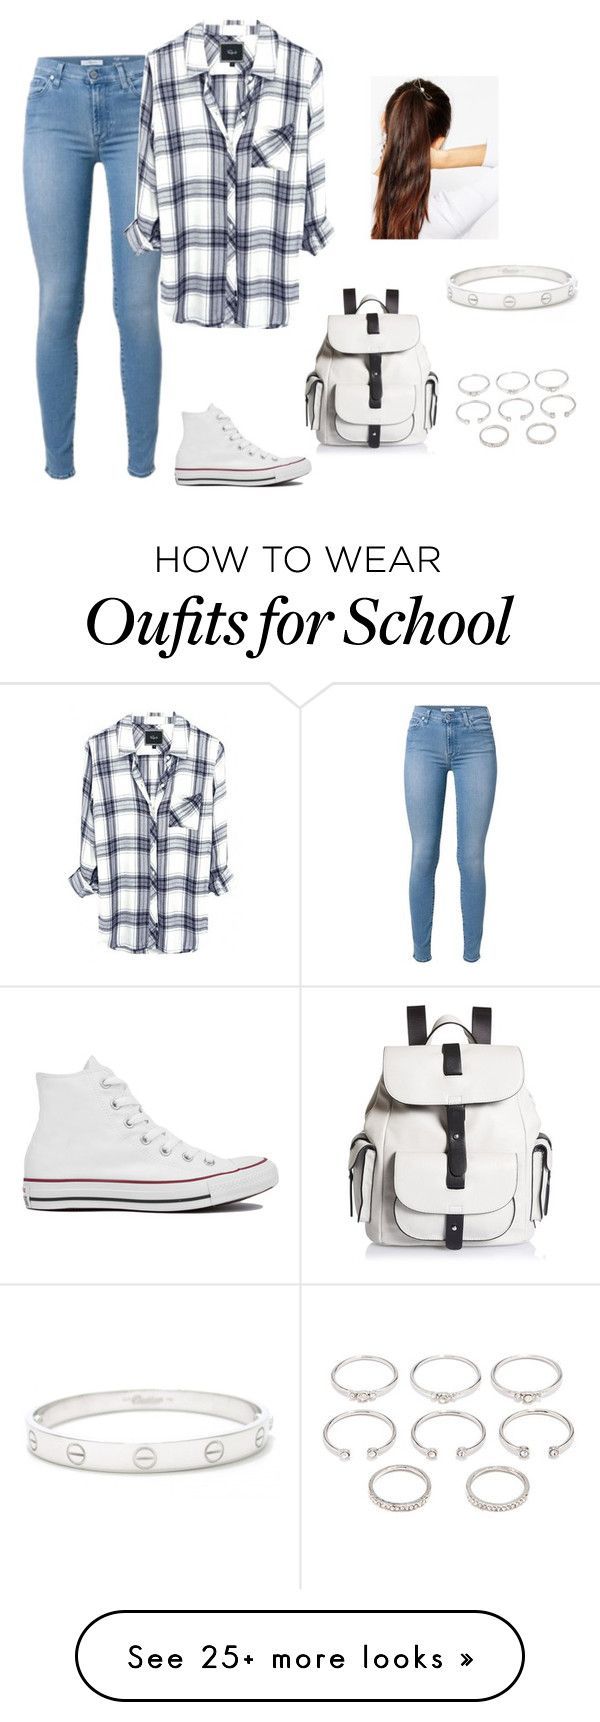 “Anather school day” by fashionlover4562 on Polyvore featuring Converse, Kenneth Cole Reaction, Forever 21, Cartier and ASOS